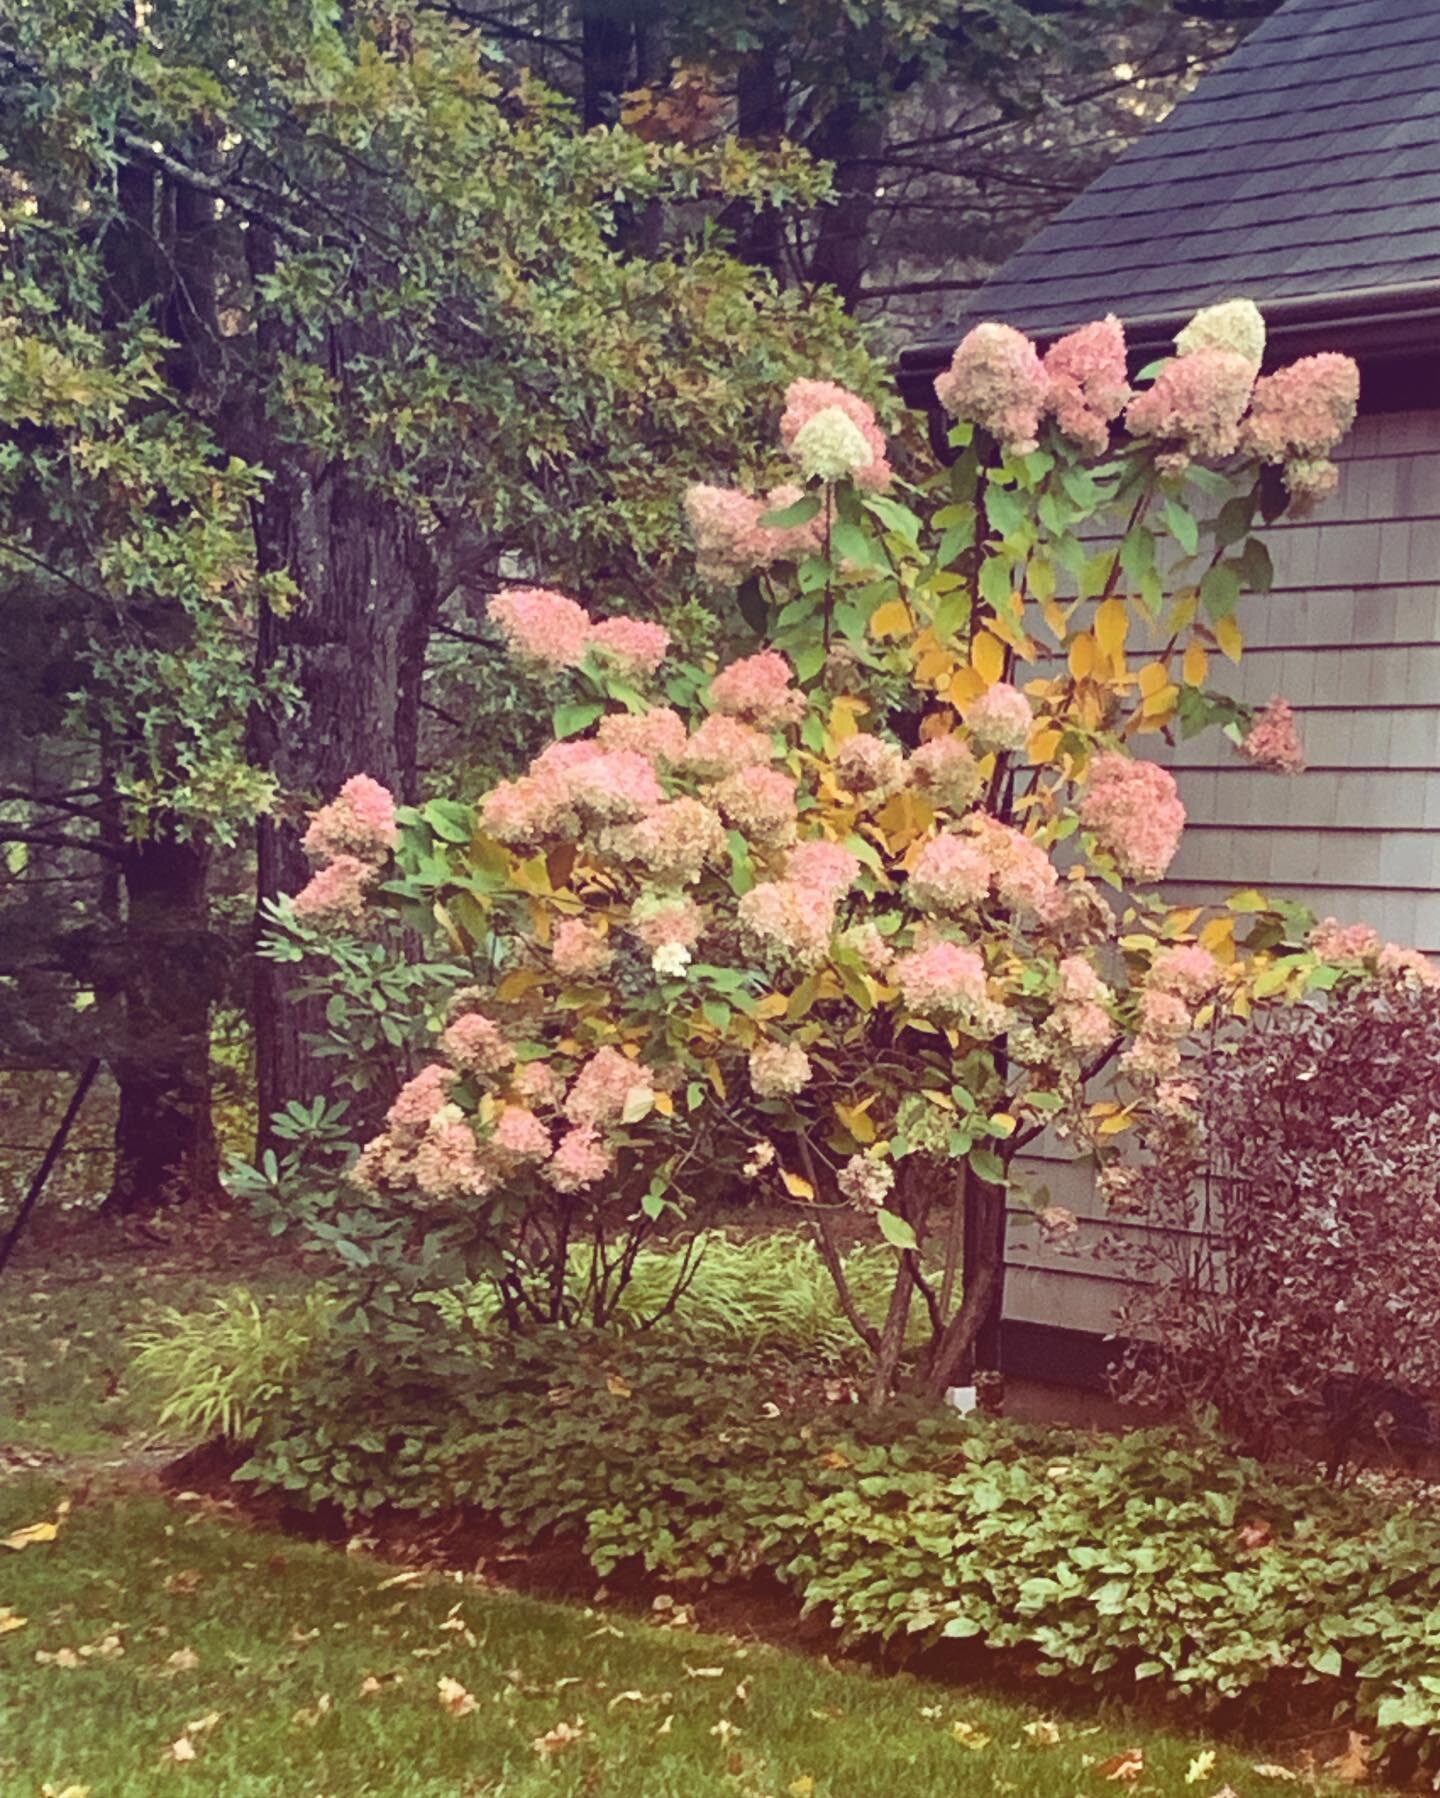 Fall flowers coming at ya from MHL!!!
#garden #hydrangeas #landscaping